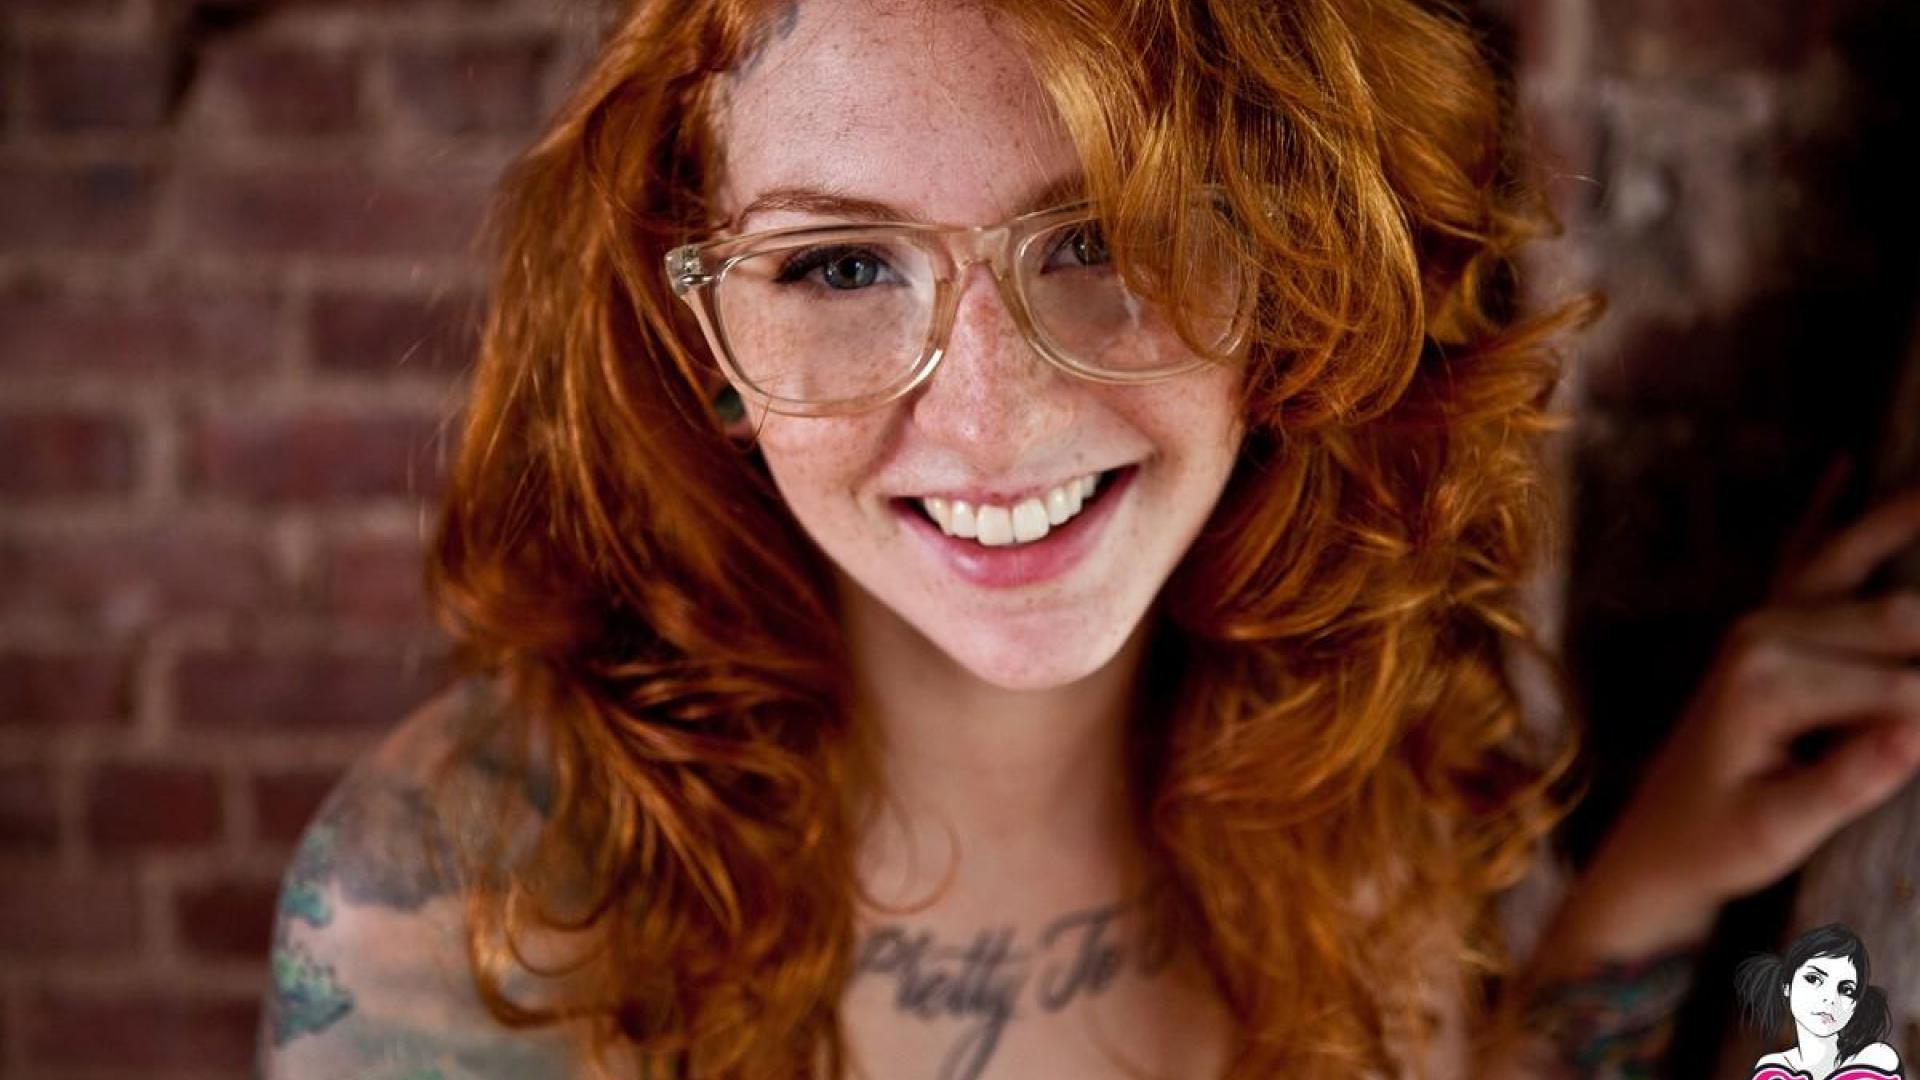 Glasses Face Tattoo Suicide girls Women Freckles Redhead Smiling